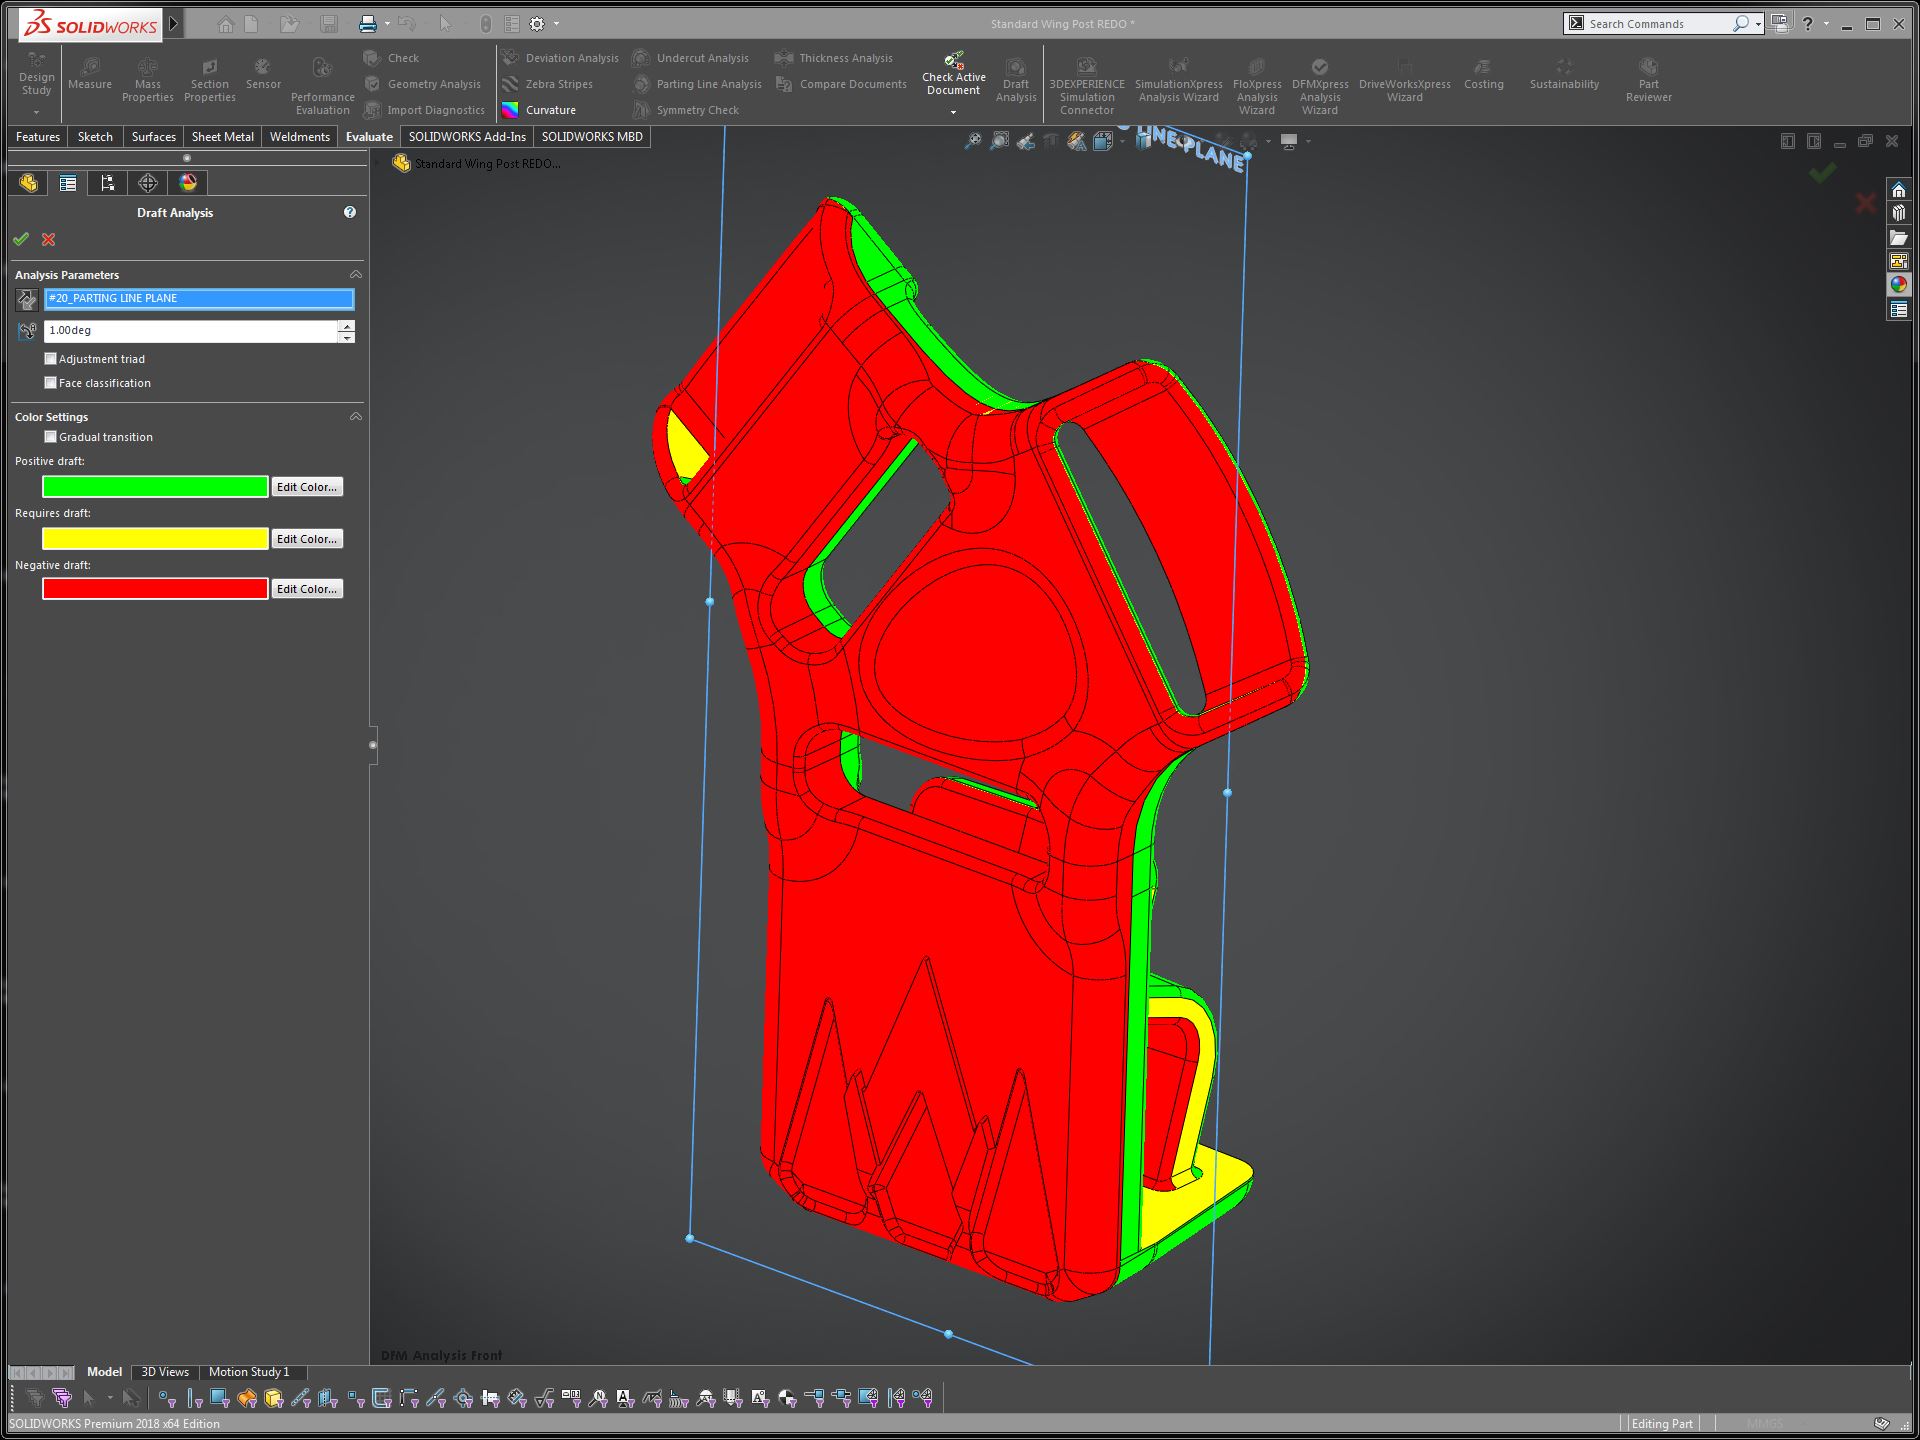 Luna Sandal Wing Post Solidworks Draft Analysis_Front View